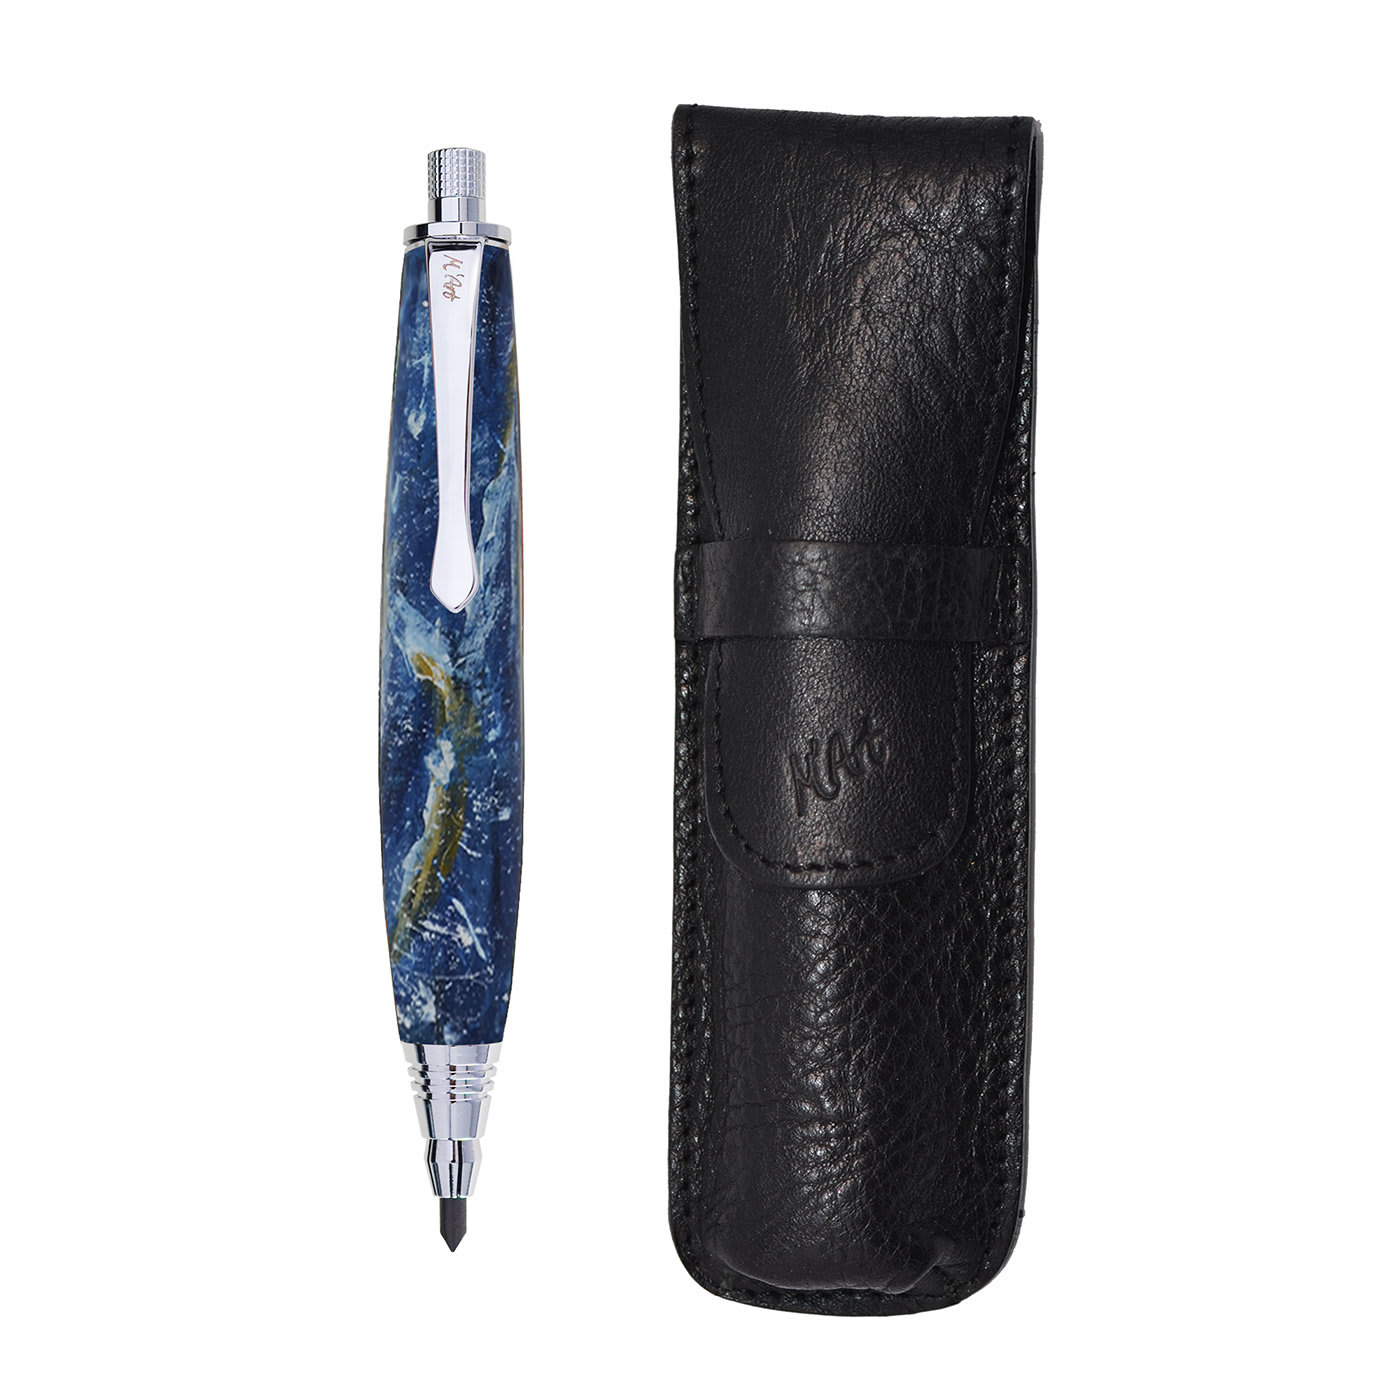 Ligabue Marbled Blue Automatic Pencil in Olive Wood - M'Art